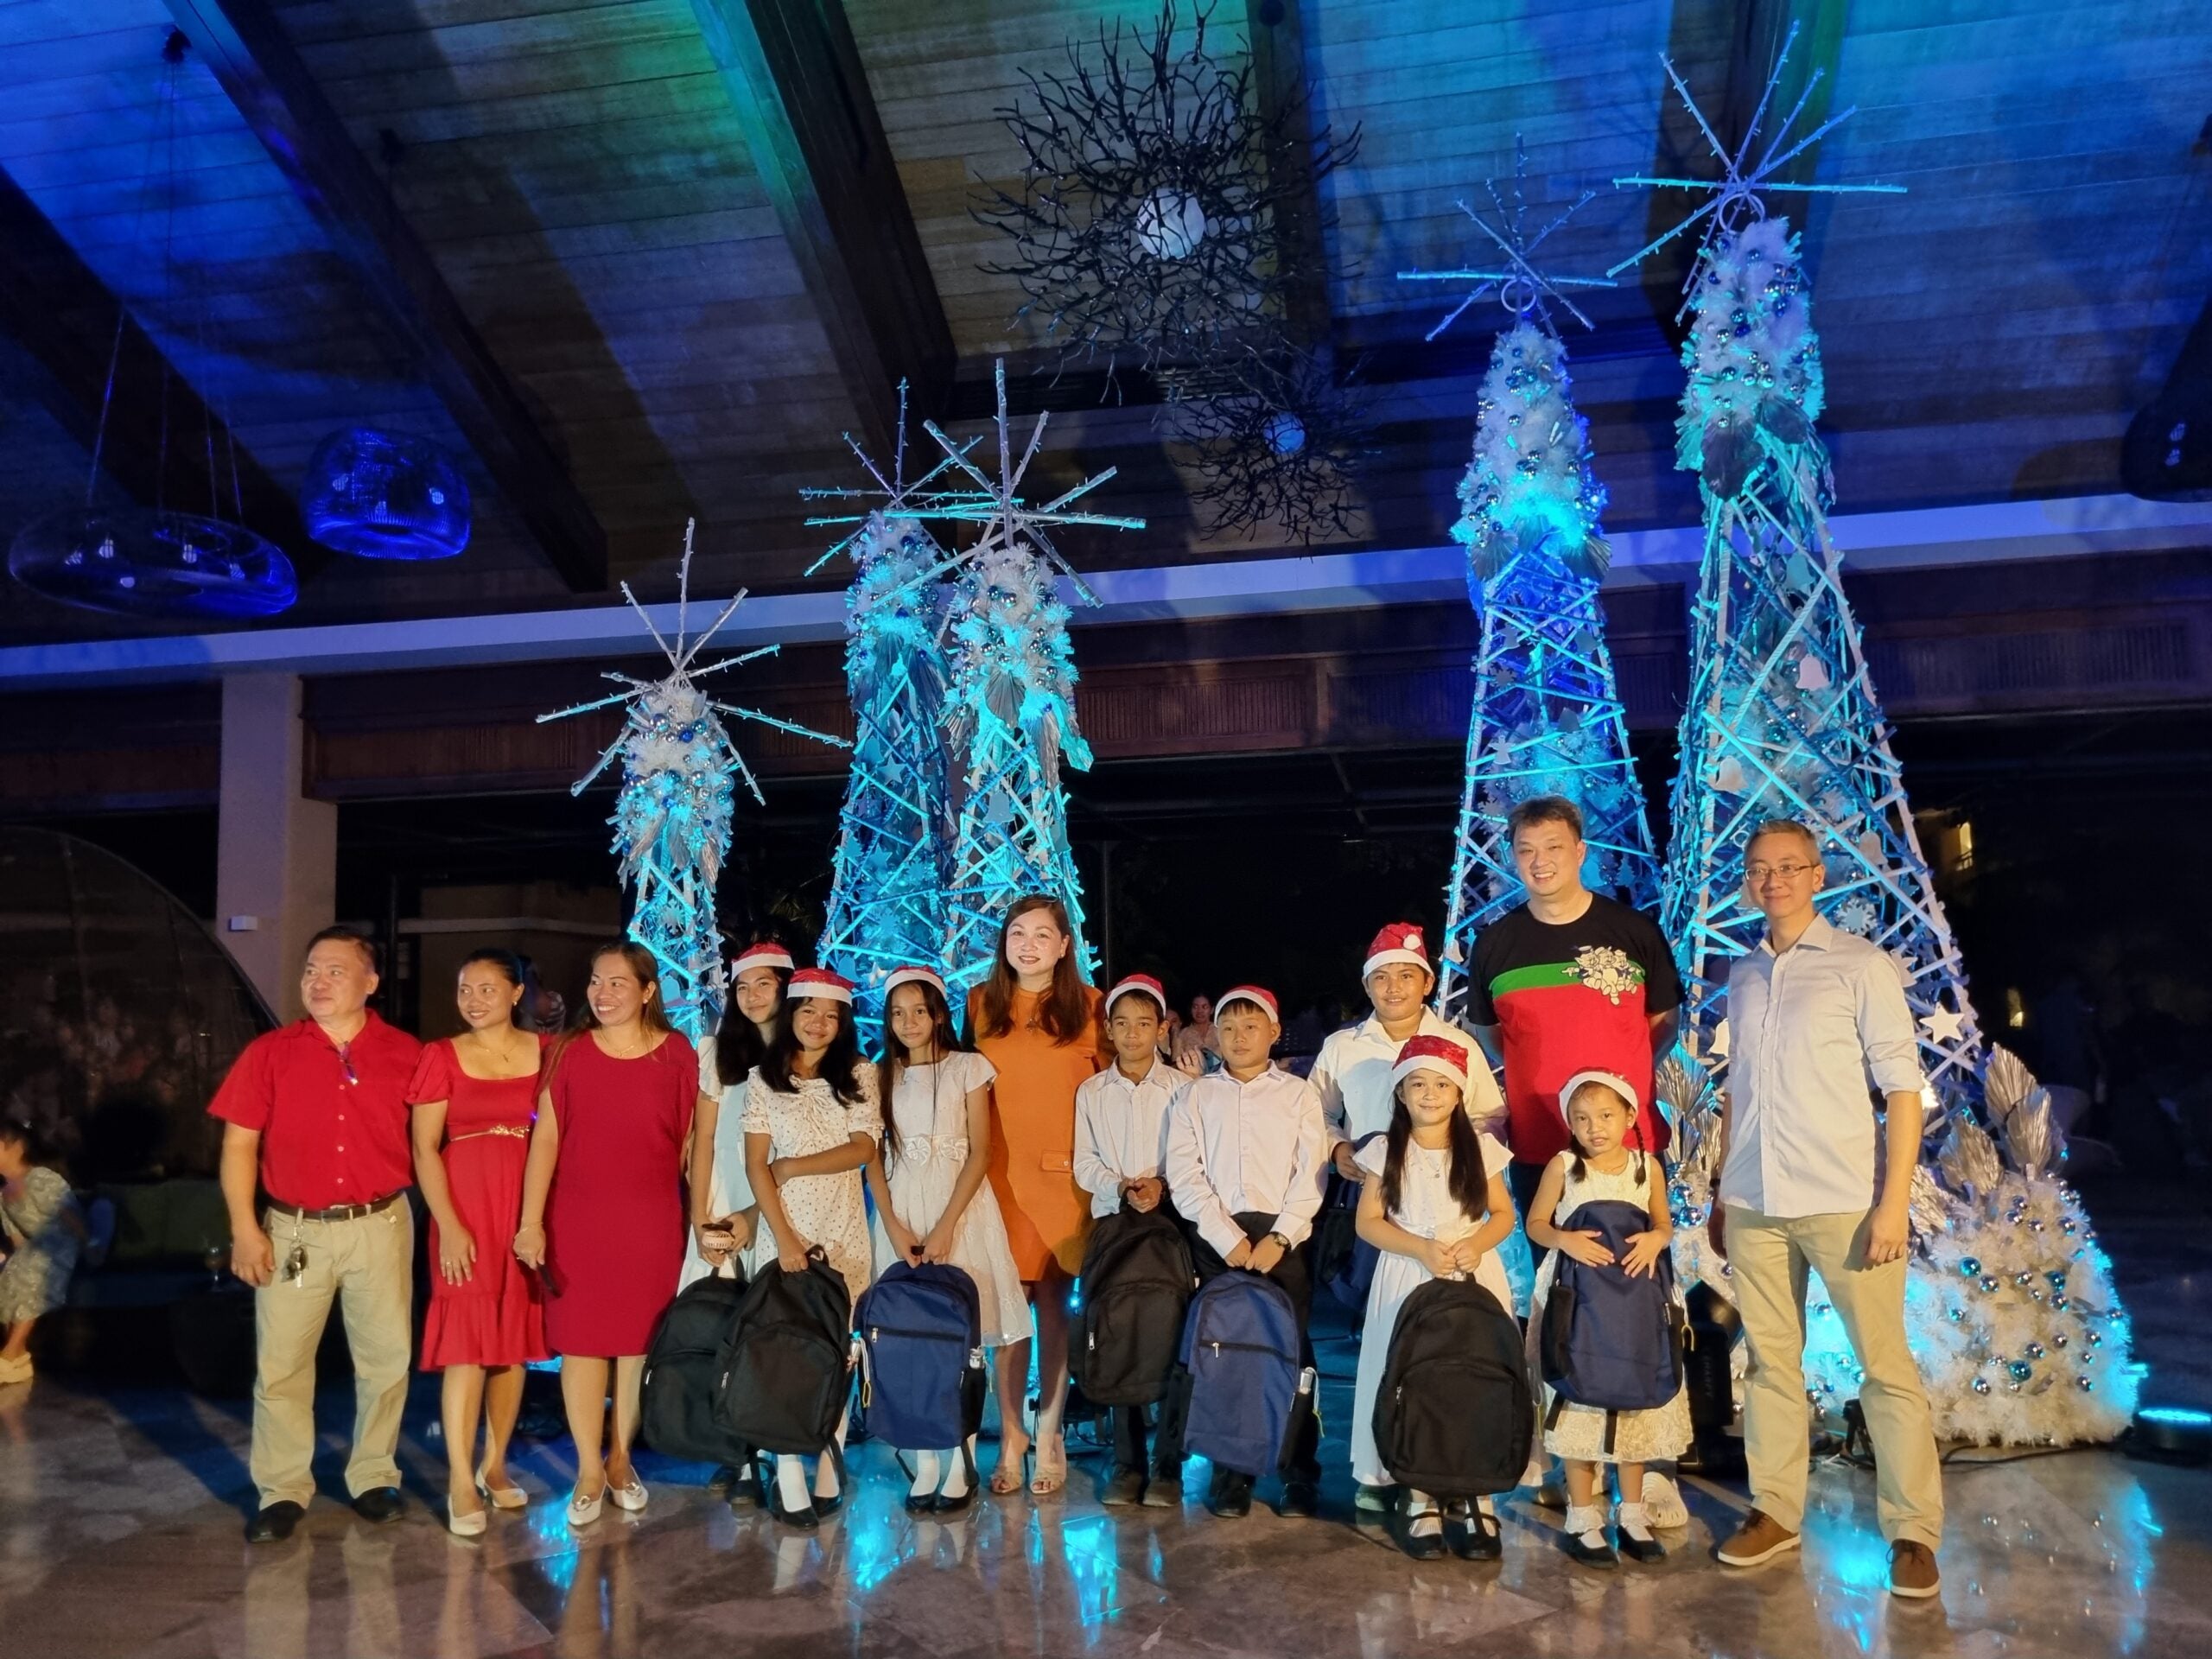 Holidays are Grander With BE Grand Resort’s Five Christmas Trees | Cebu Daily News